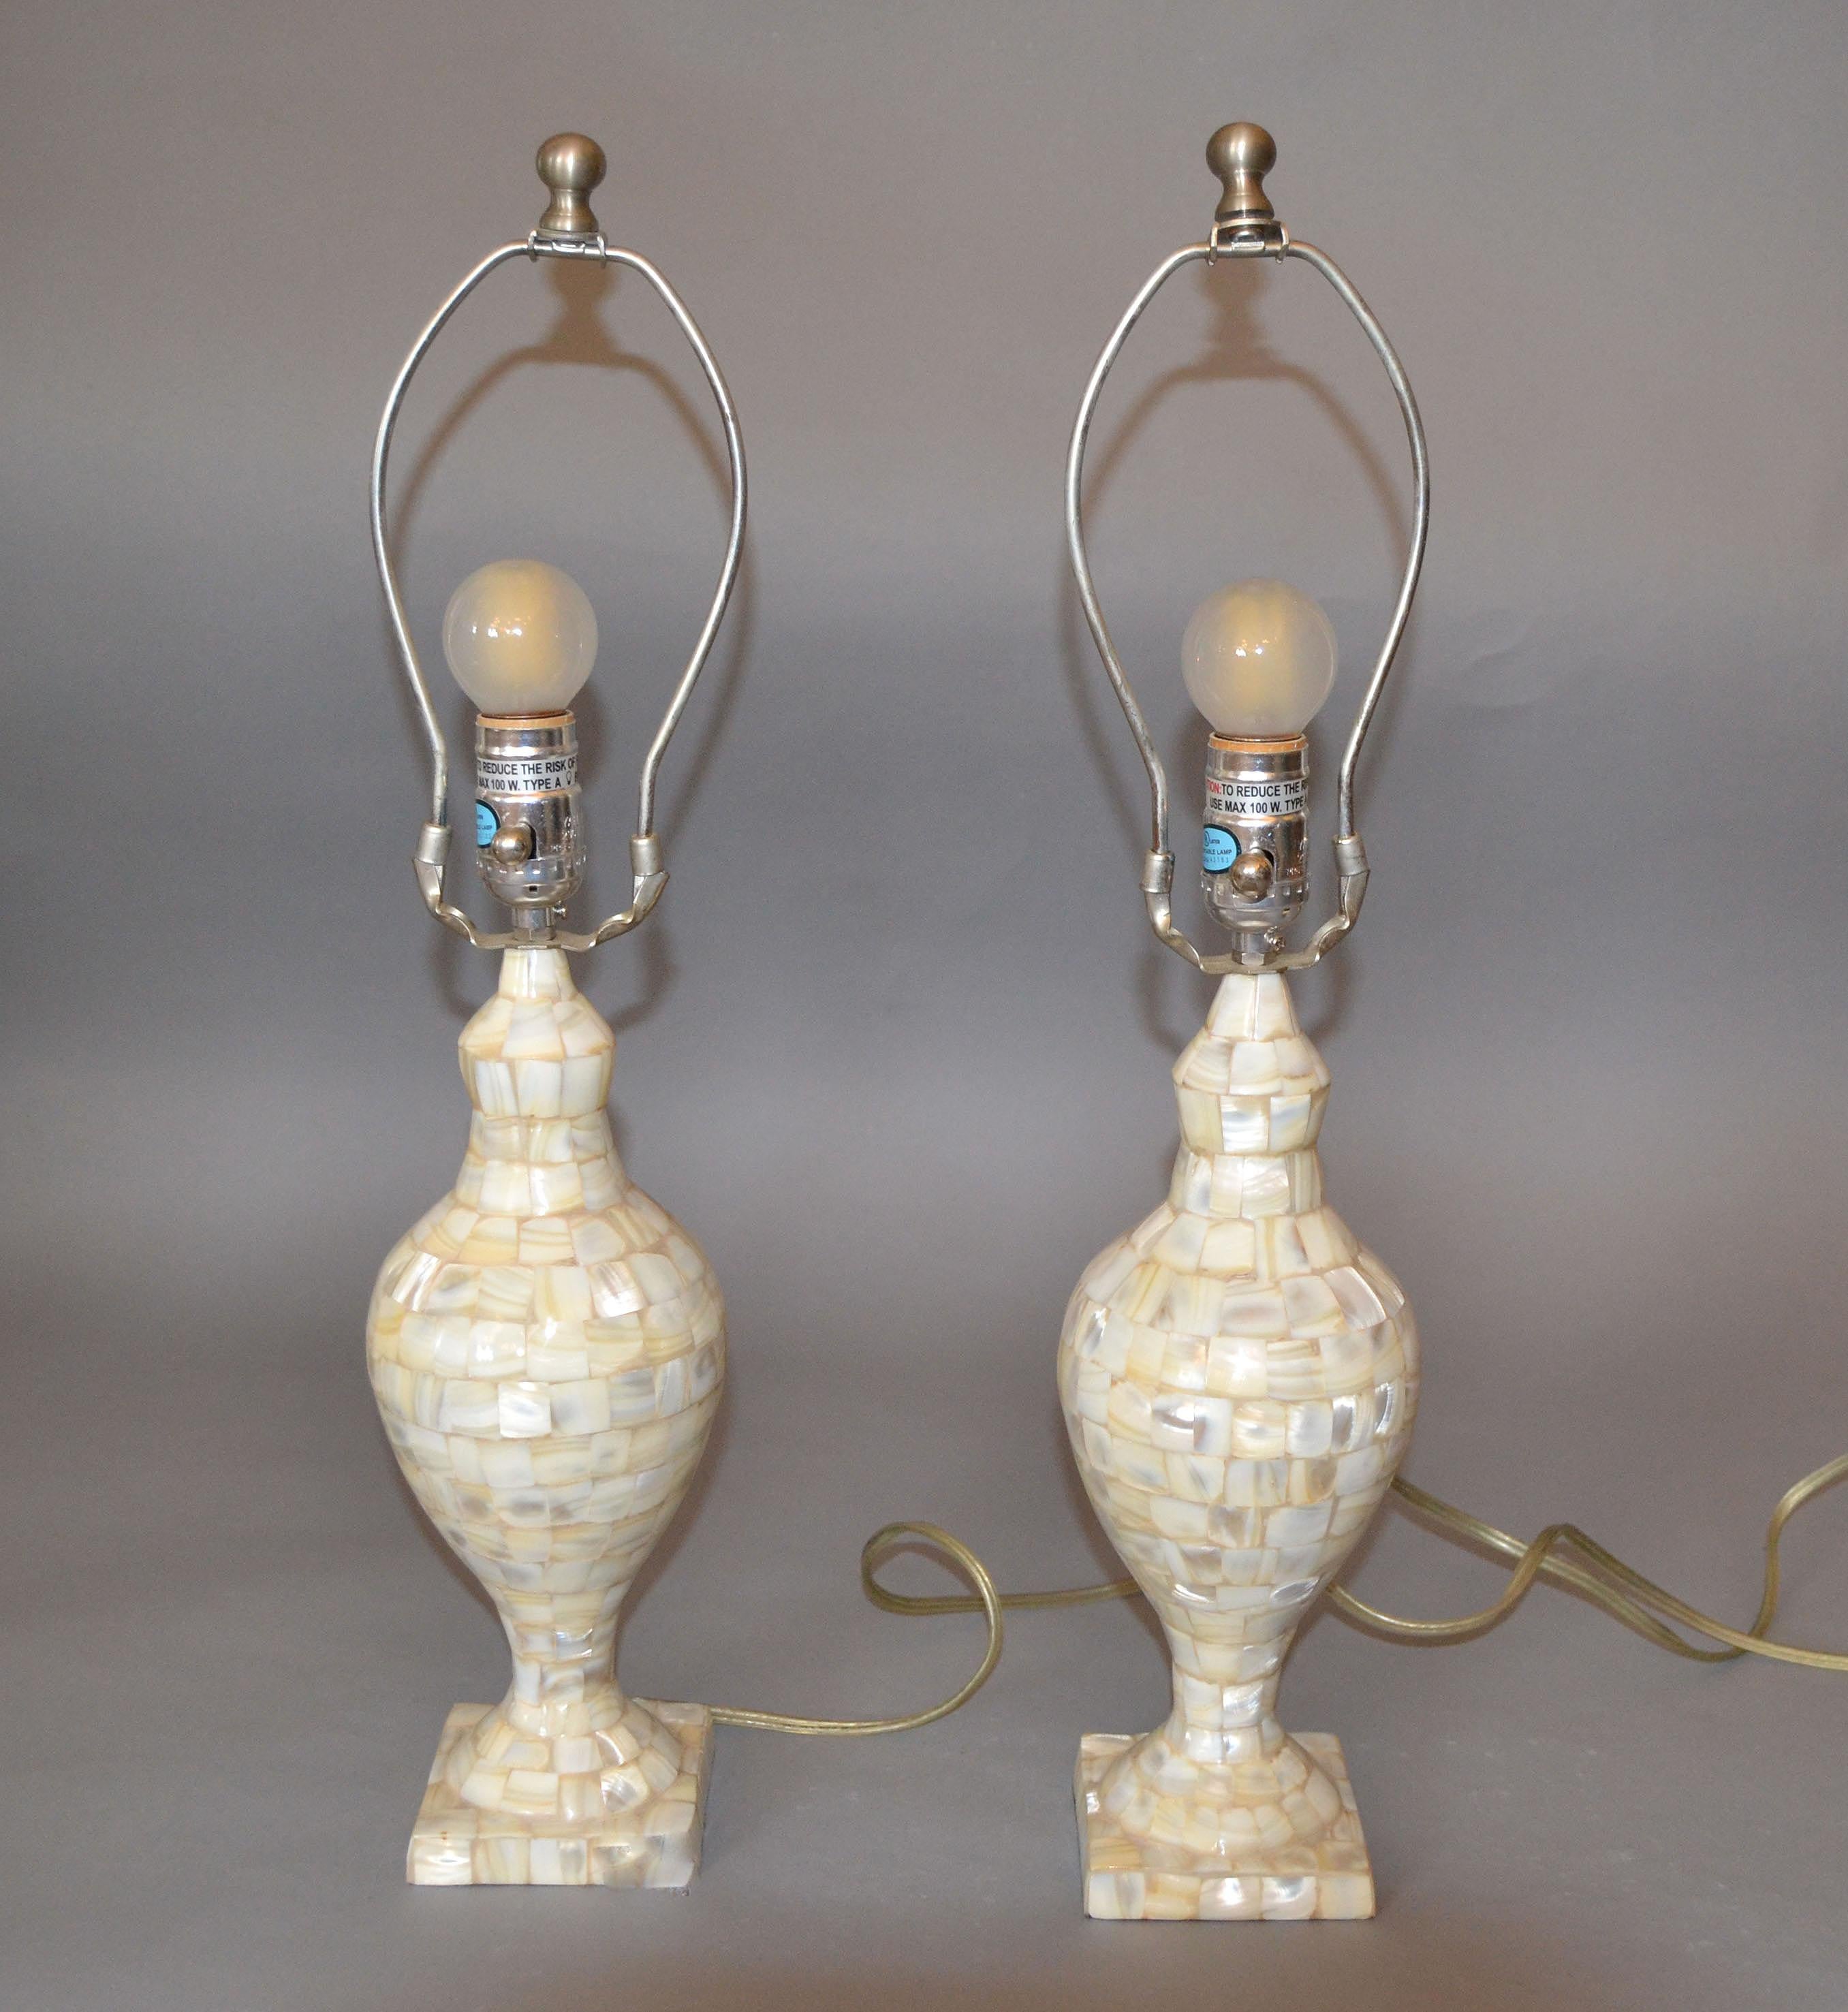 A pair of vintage Capiz shell table lamps.
Perfect working condition and each uses a max. 60 watts light bulb.
The set comes with harp, finial and original shades.
The original Shades are in need of replacement. 
Measurement shade:
Height 9 inches,